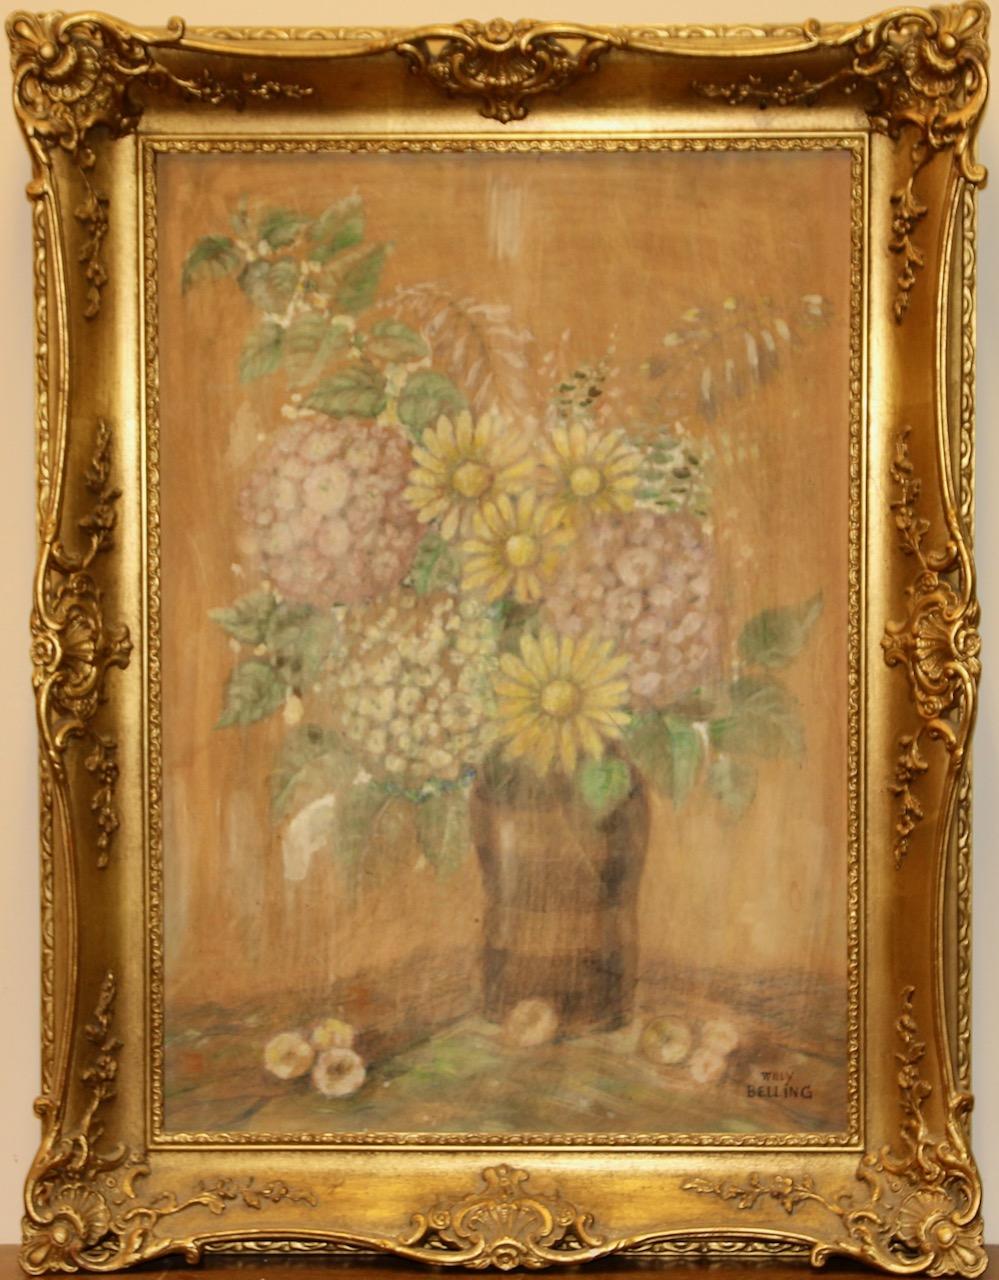 Antique Oil Paintig by Willy Belling, Still Life with Flower Vase For Sale 1